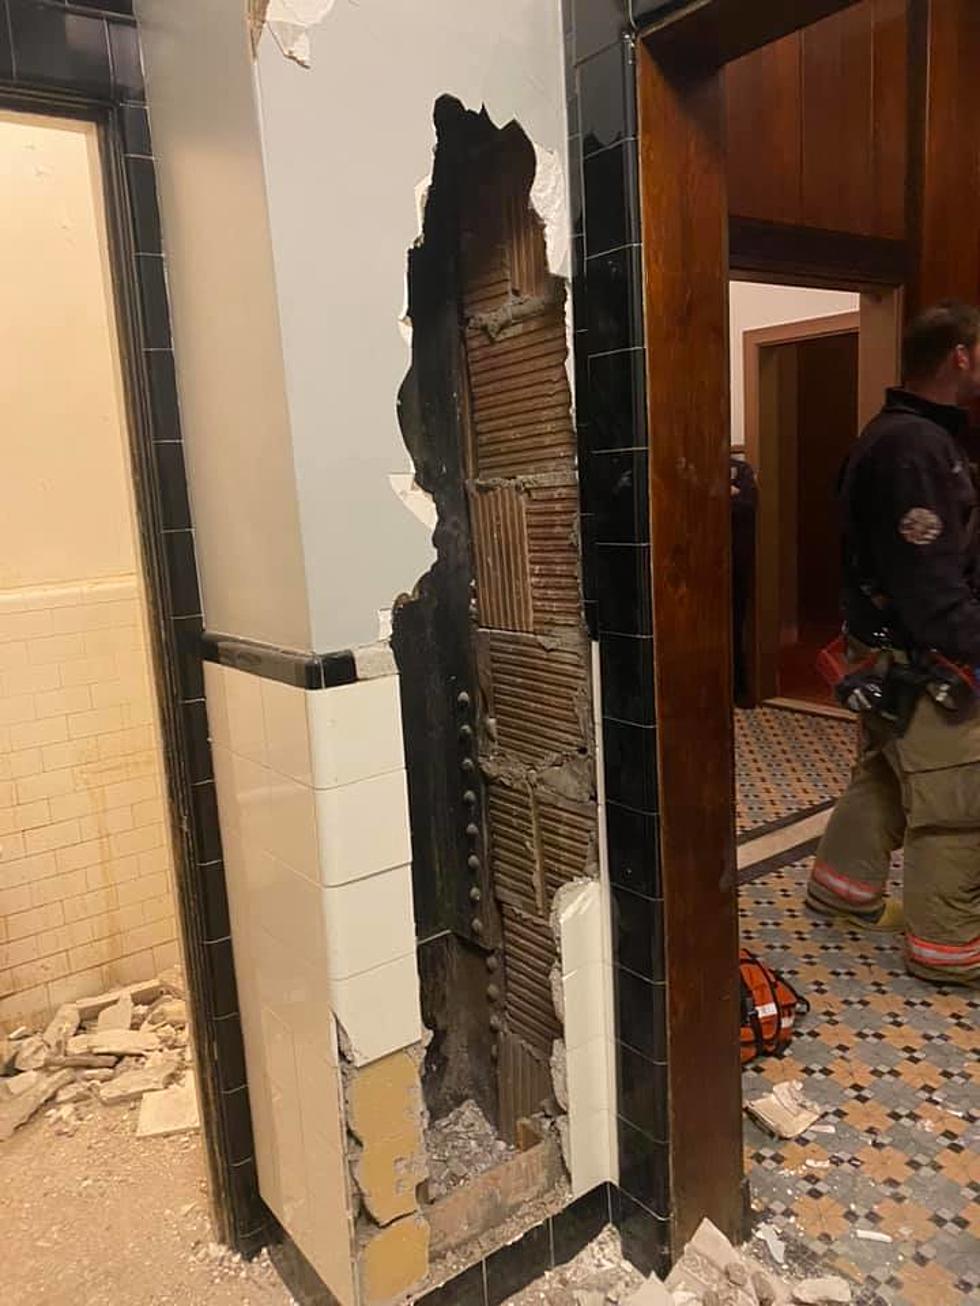 Man Found Naked In Wall Of Landmark Theatre, Rescued By Syracuse Firefighters